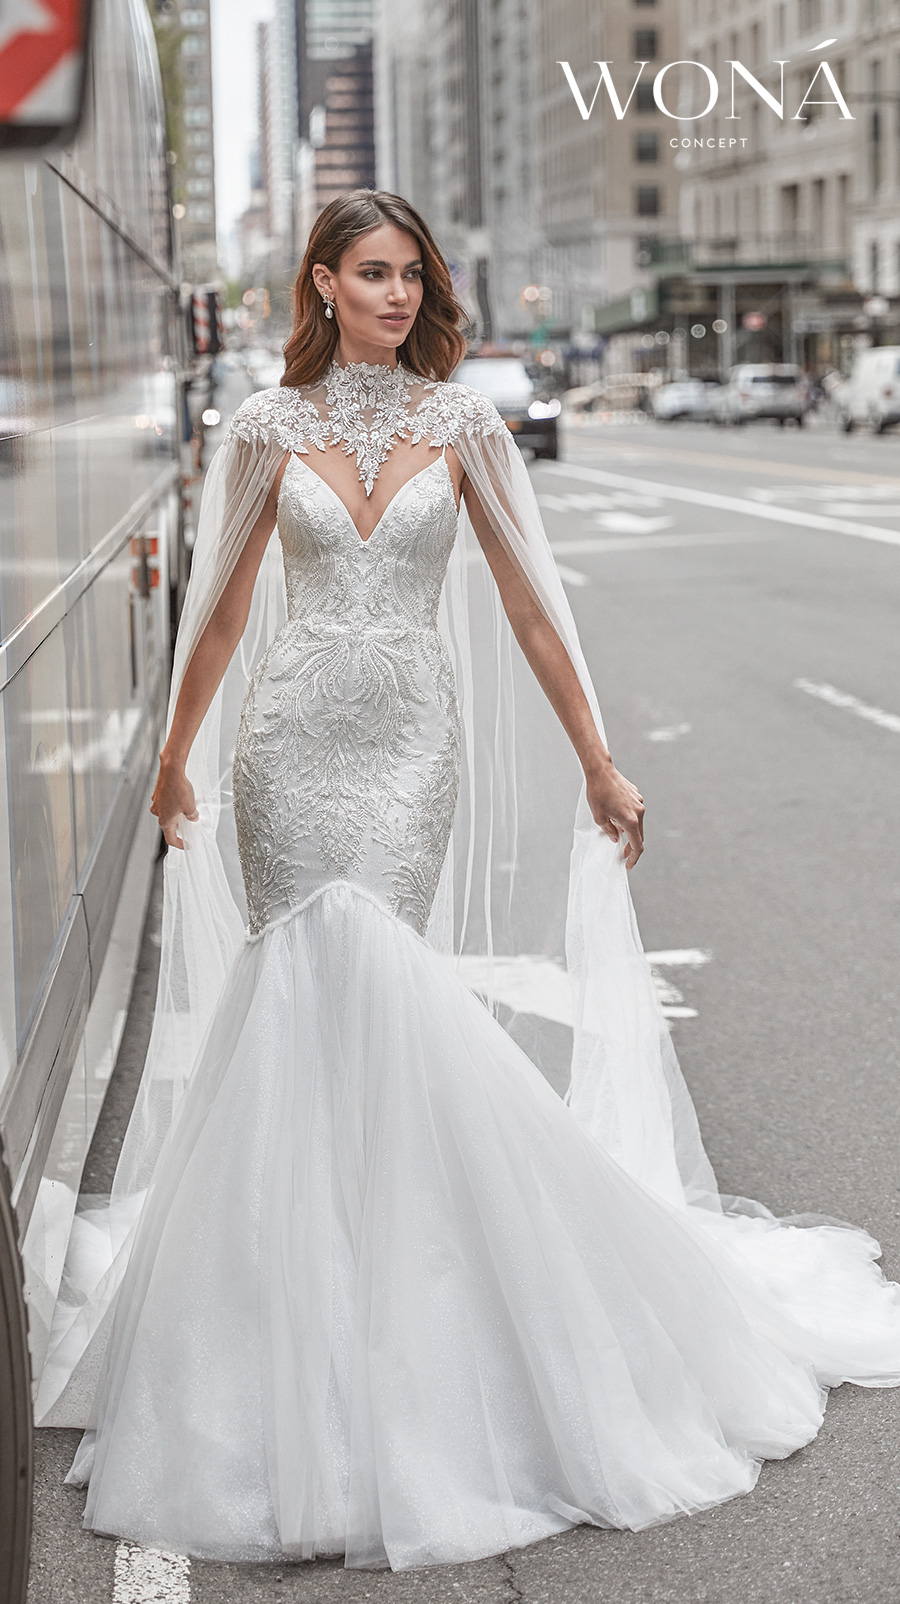 Wedding Gown Bride Dresses White Ivoty Cape Lace Beaded Mermaid Train Appliques 